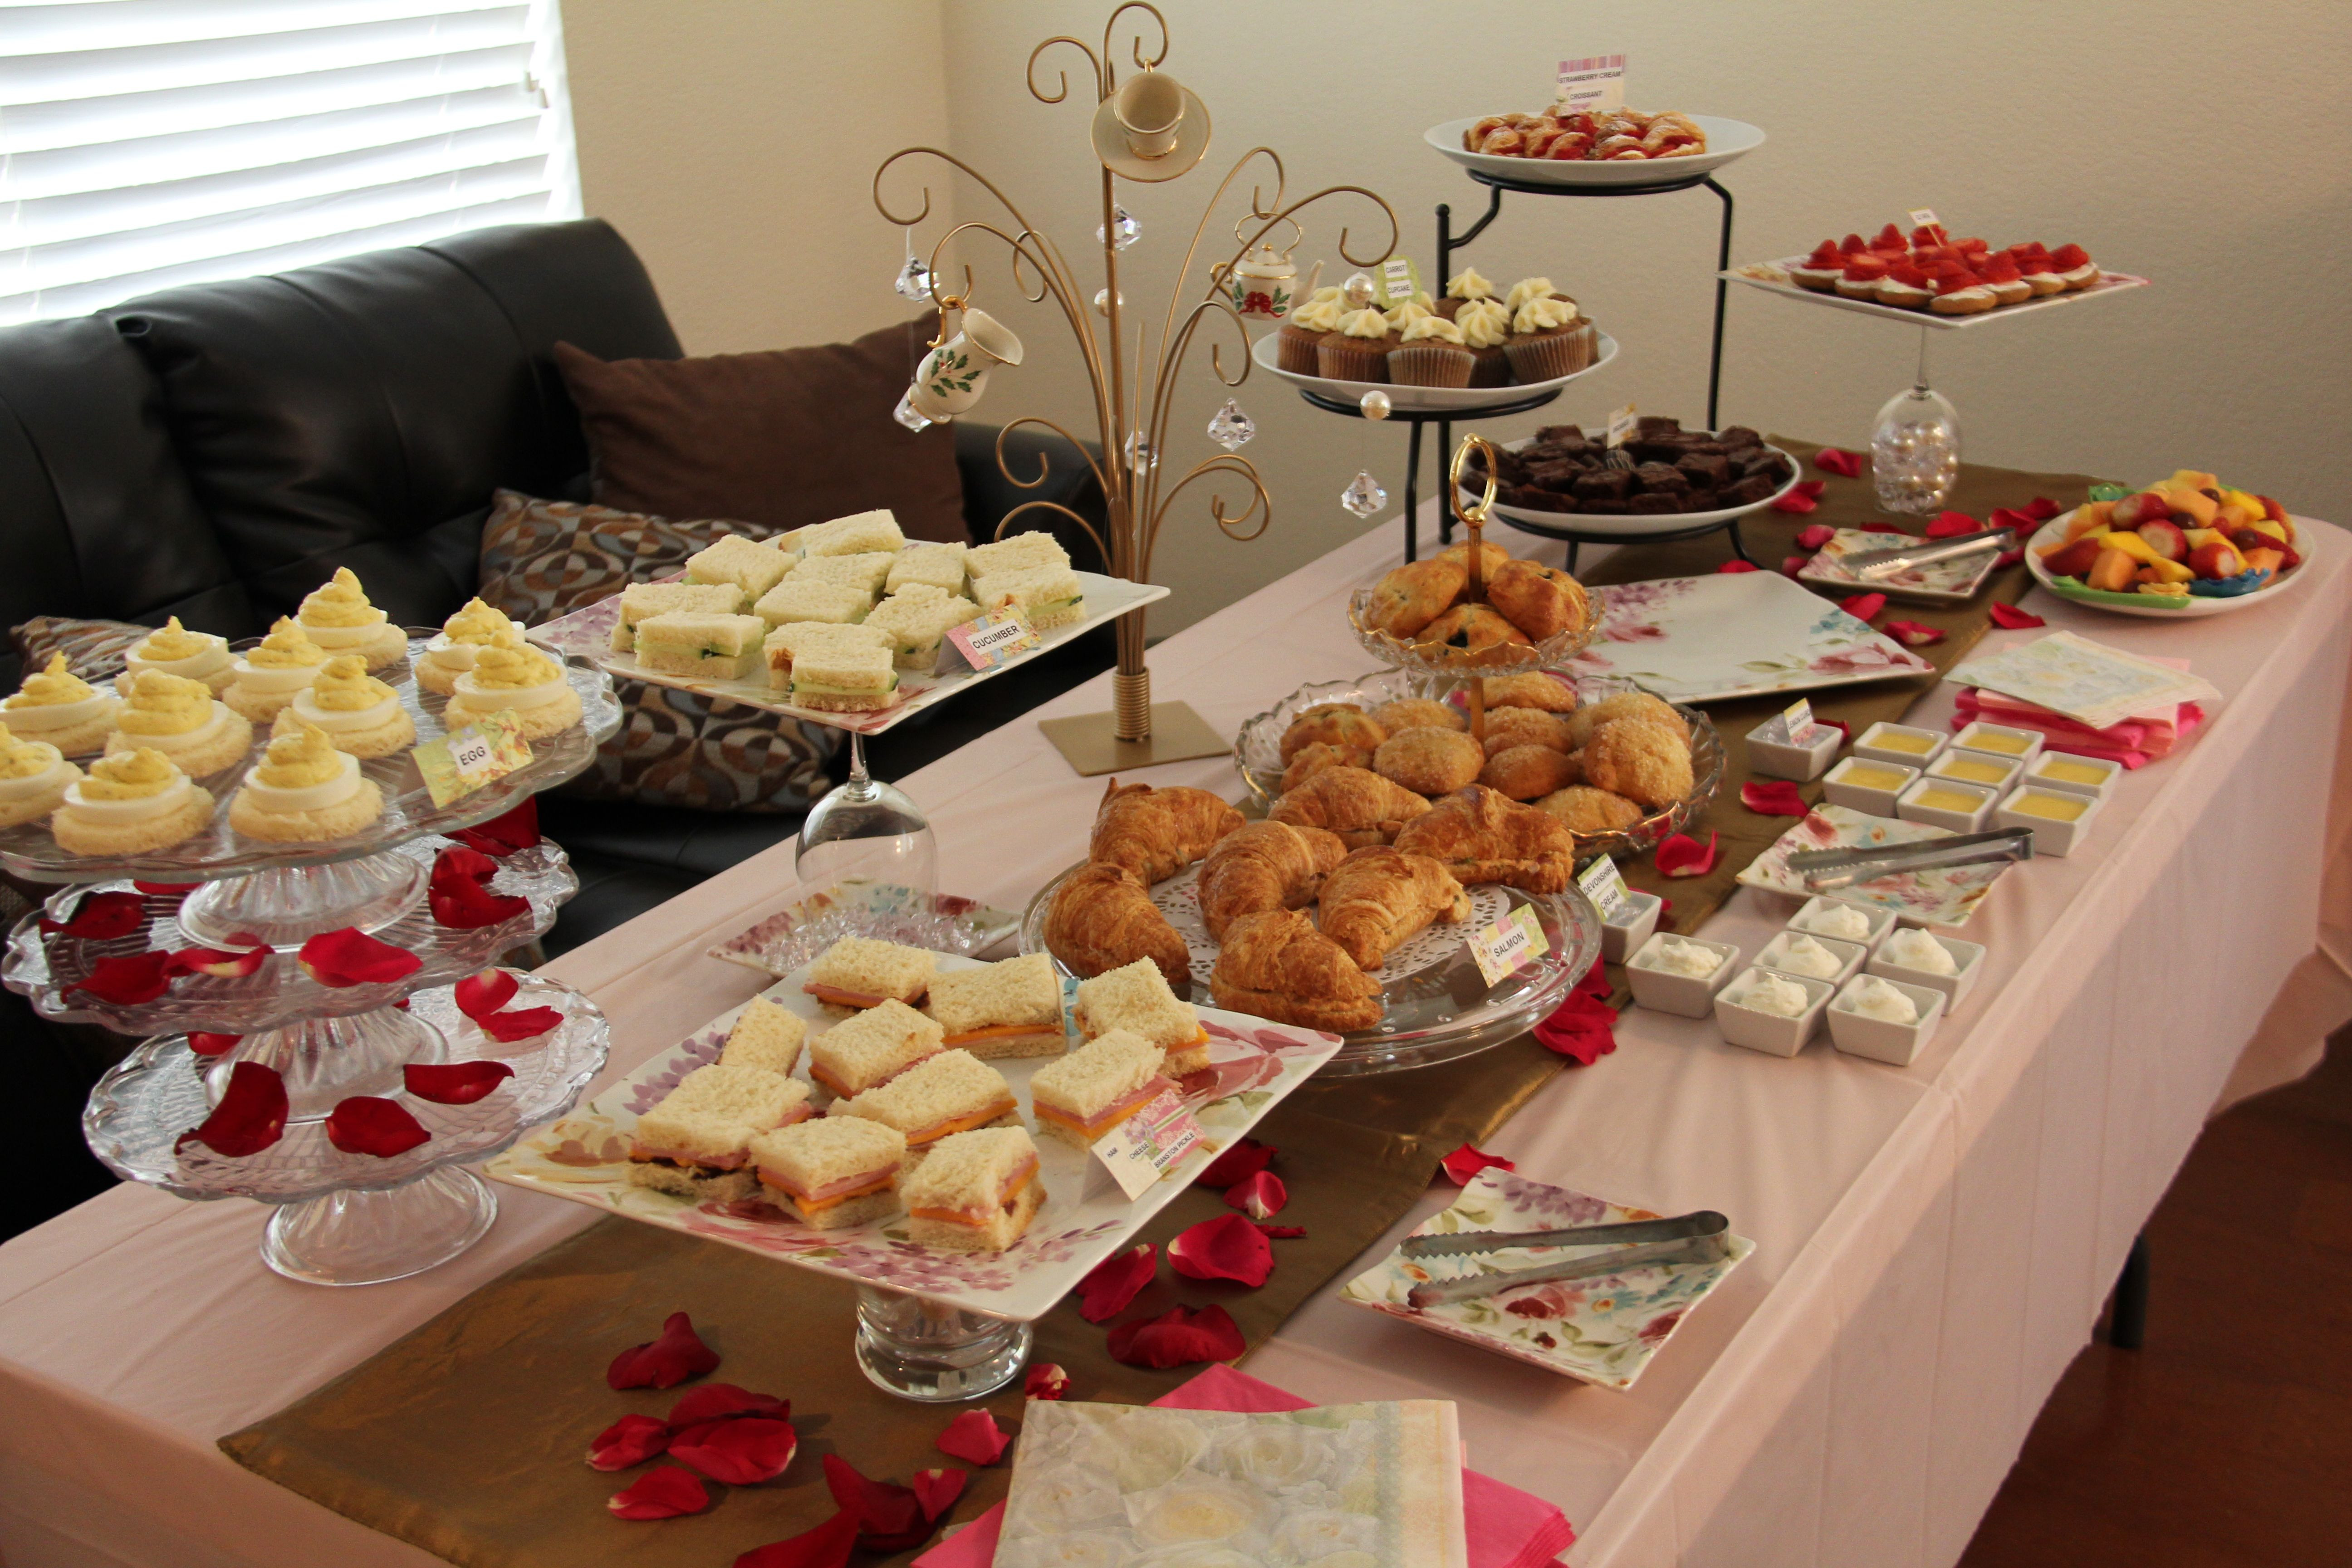 Tea Party Menu Ideas For Adults
 buffet tea party table Our Place in 2019